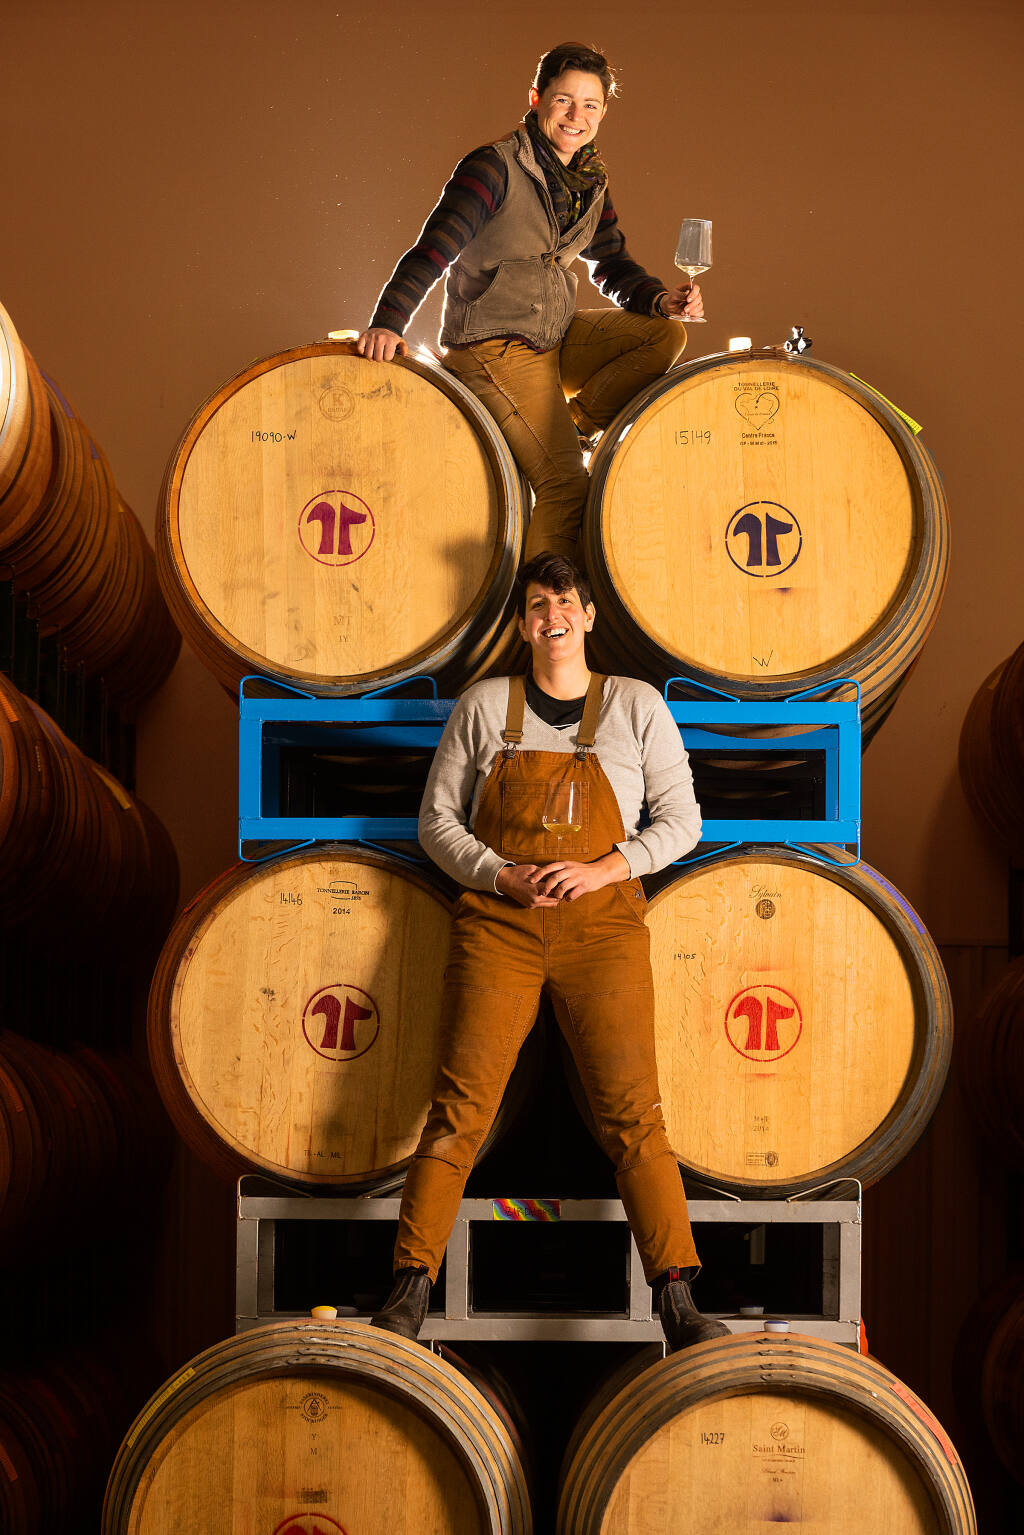 Katie Rouse, a winemaker with Bedrock Wine Co., top, and Corrine Rich, a winemaker with Scribe are life partners and partners in Birdhorse Wines, a small passion project produced in Sonoma. Wednesday, Dec. 7, 2022. (John Burgess/The Press Democrat)